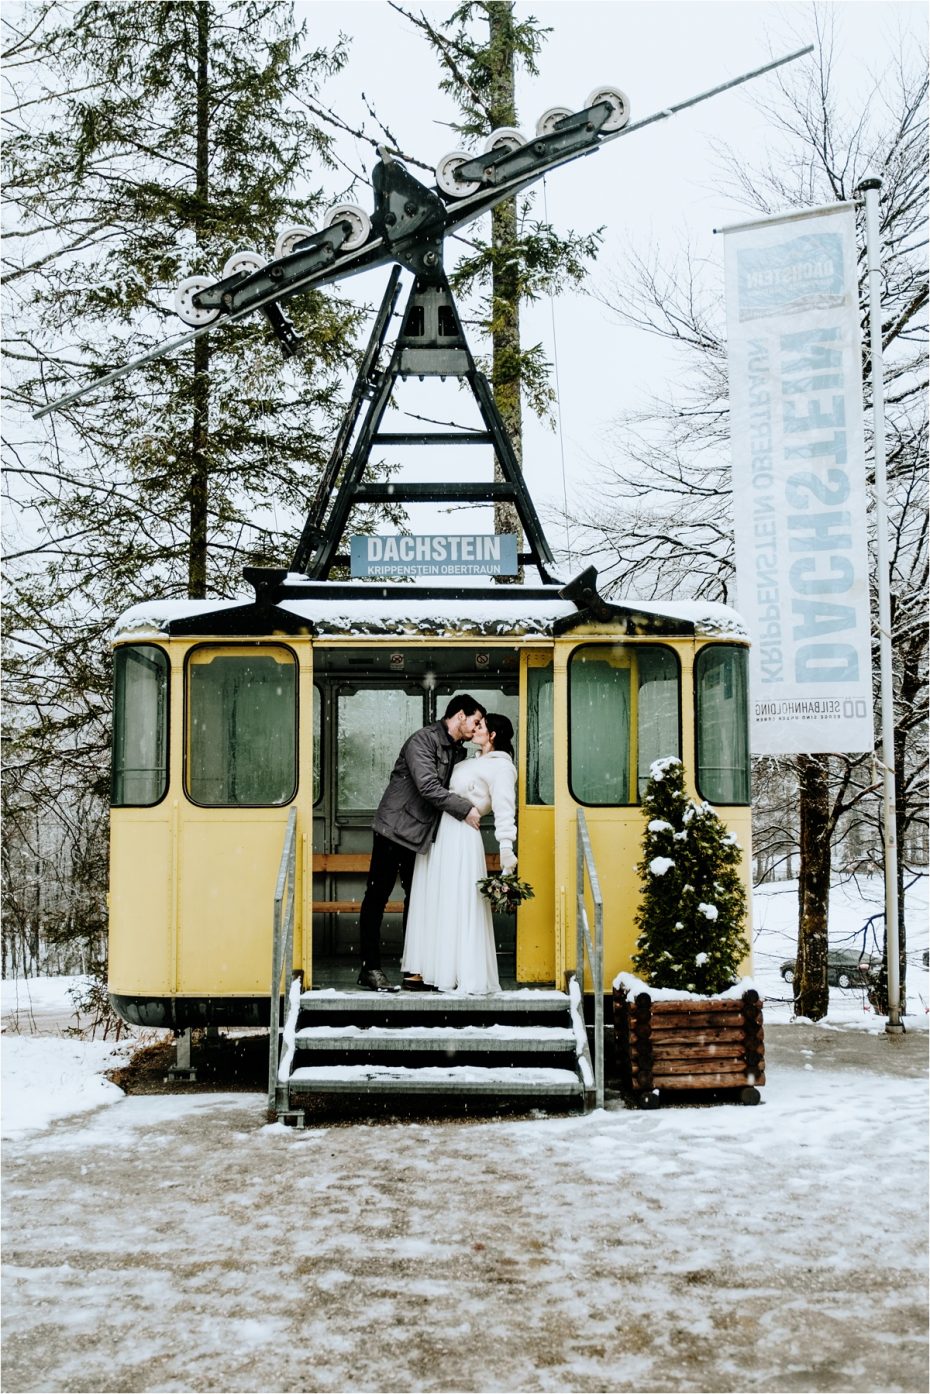 Bride and groom kiss in a vintage cable car in Hallstatt Austria after their elopement wedding. Photos by Wild Connections Photography